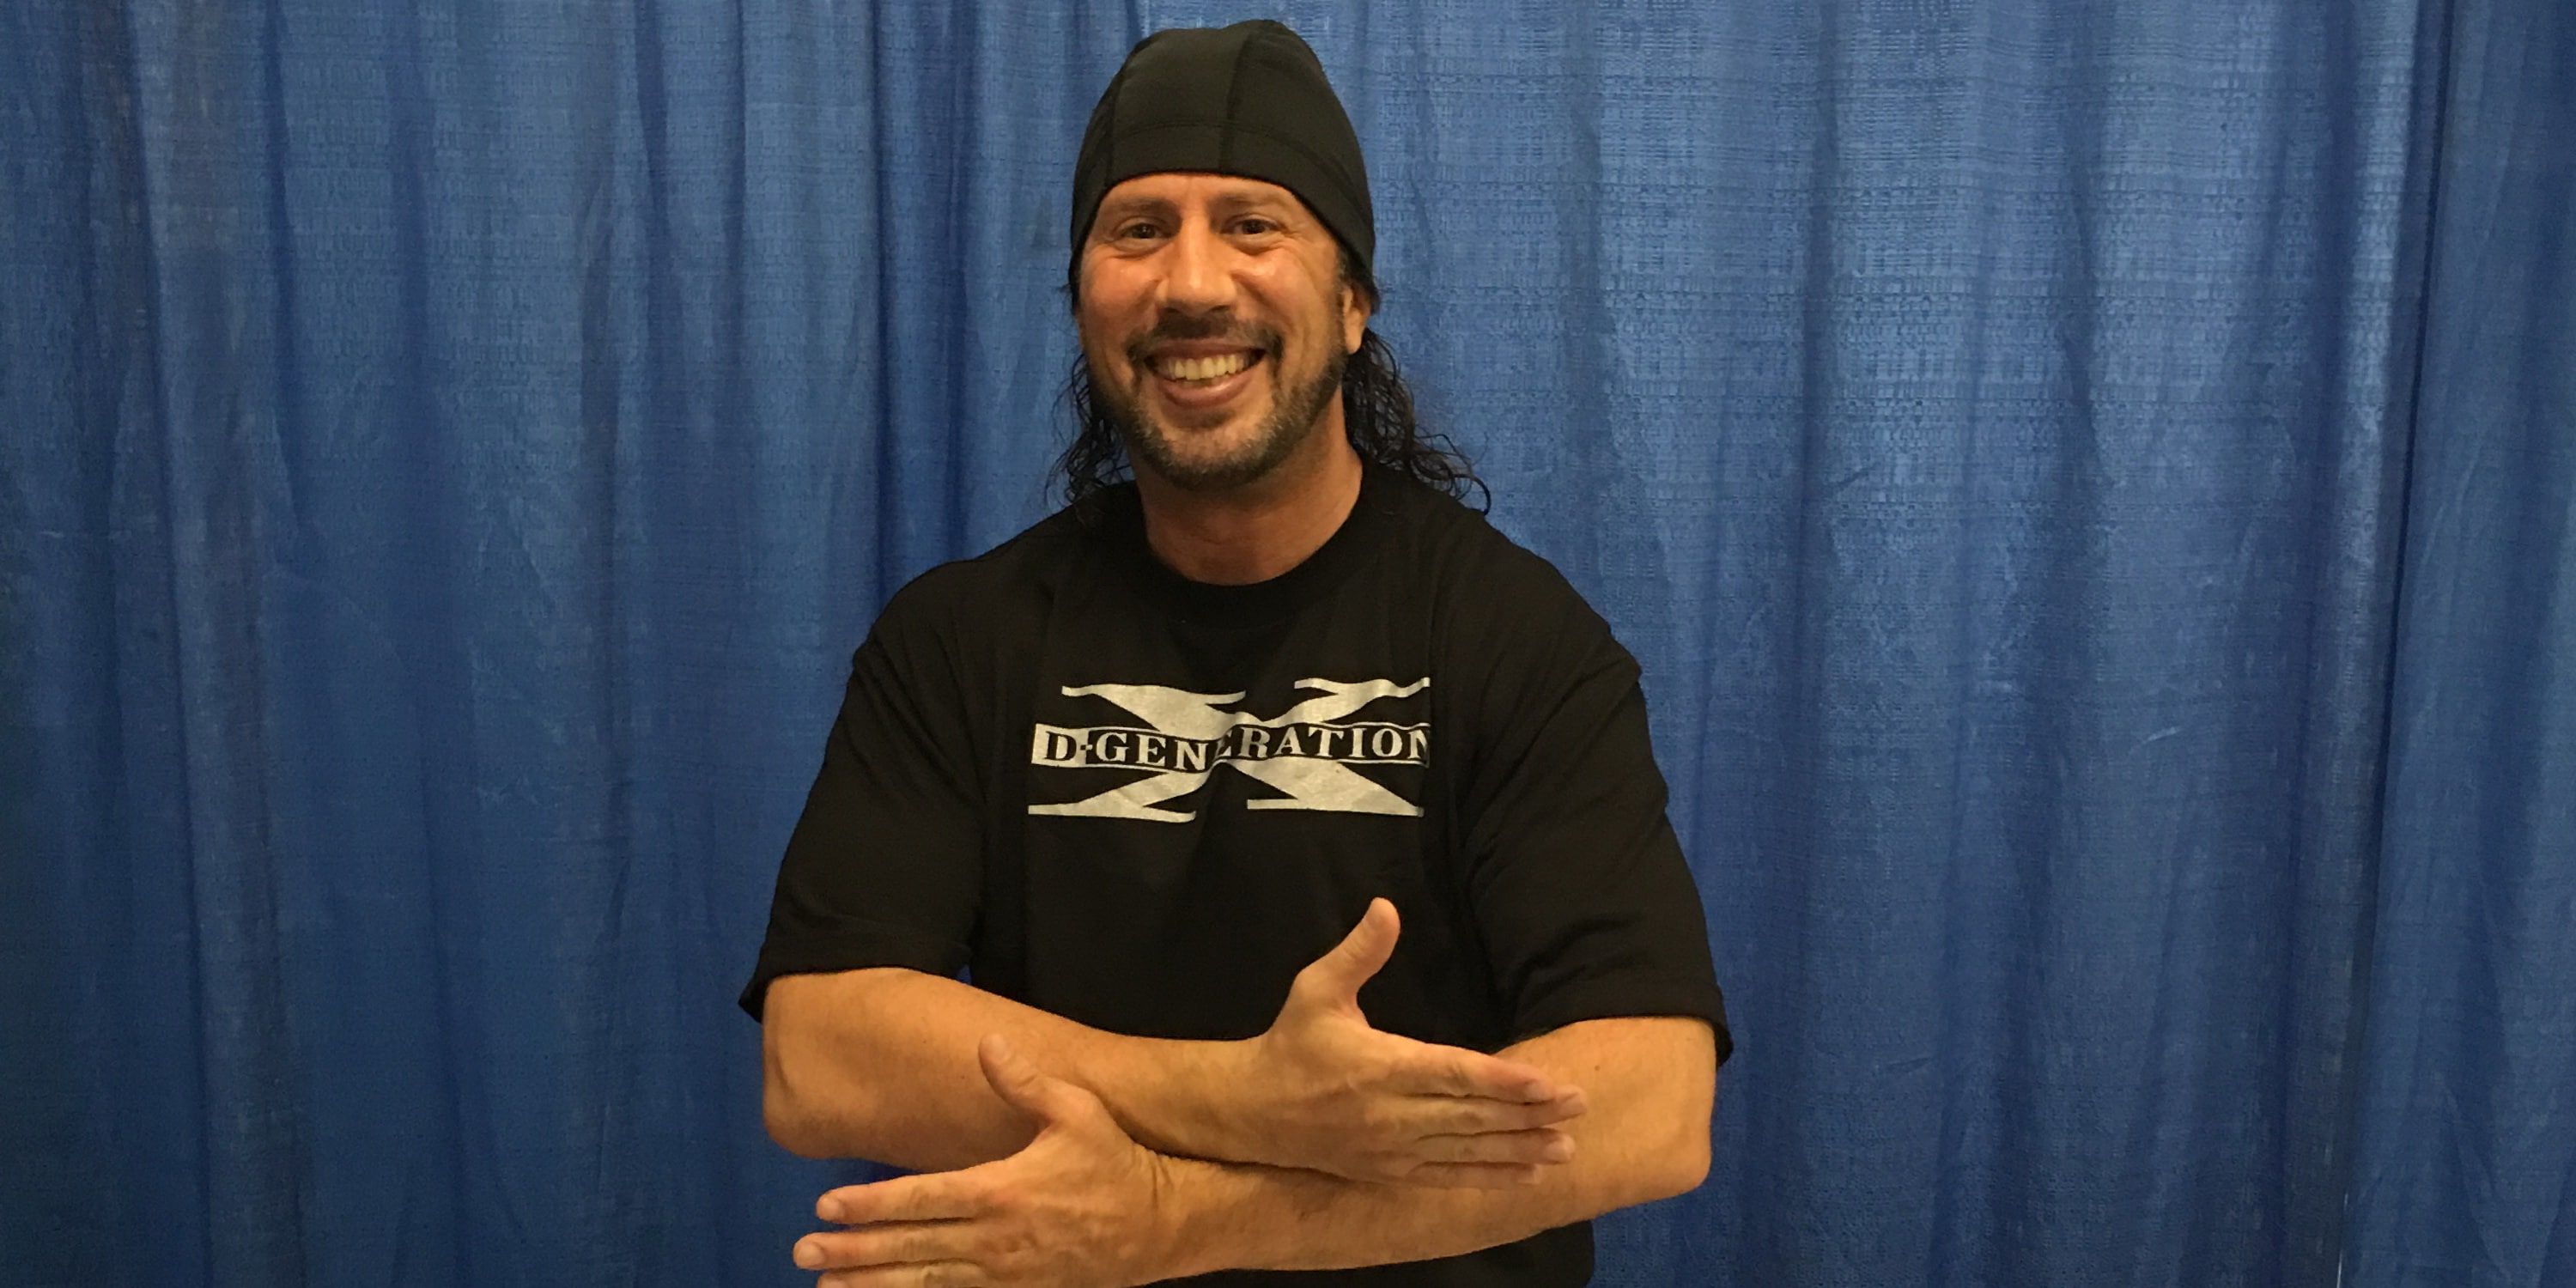 XPac doing the DX sign